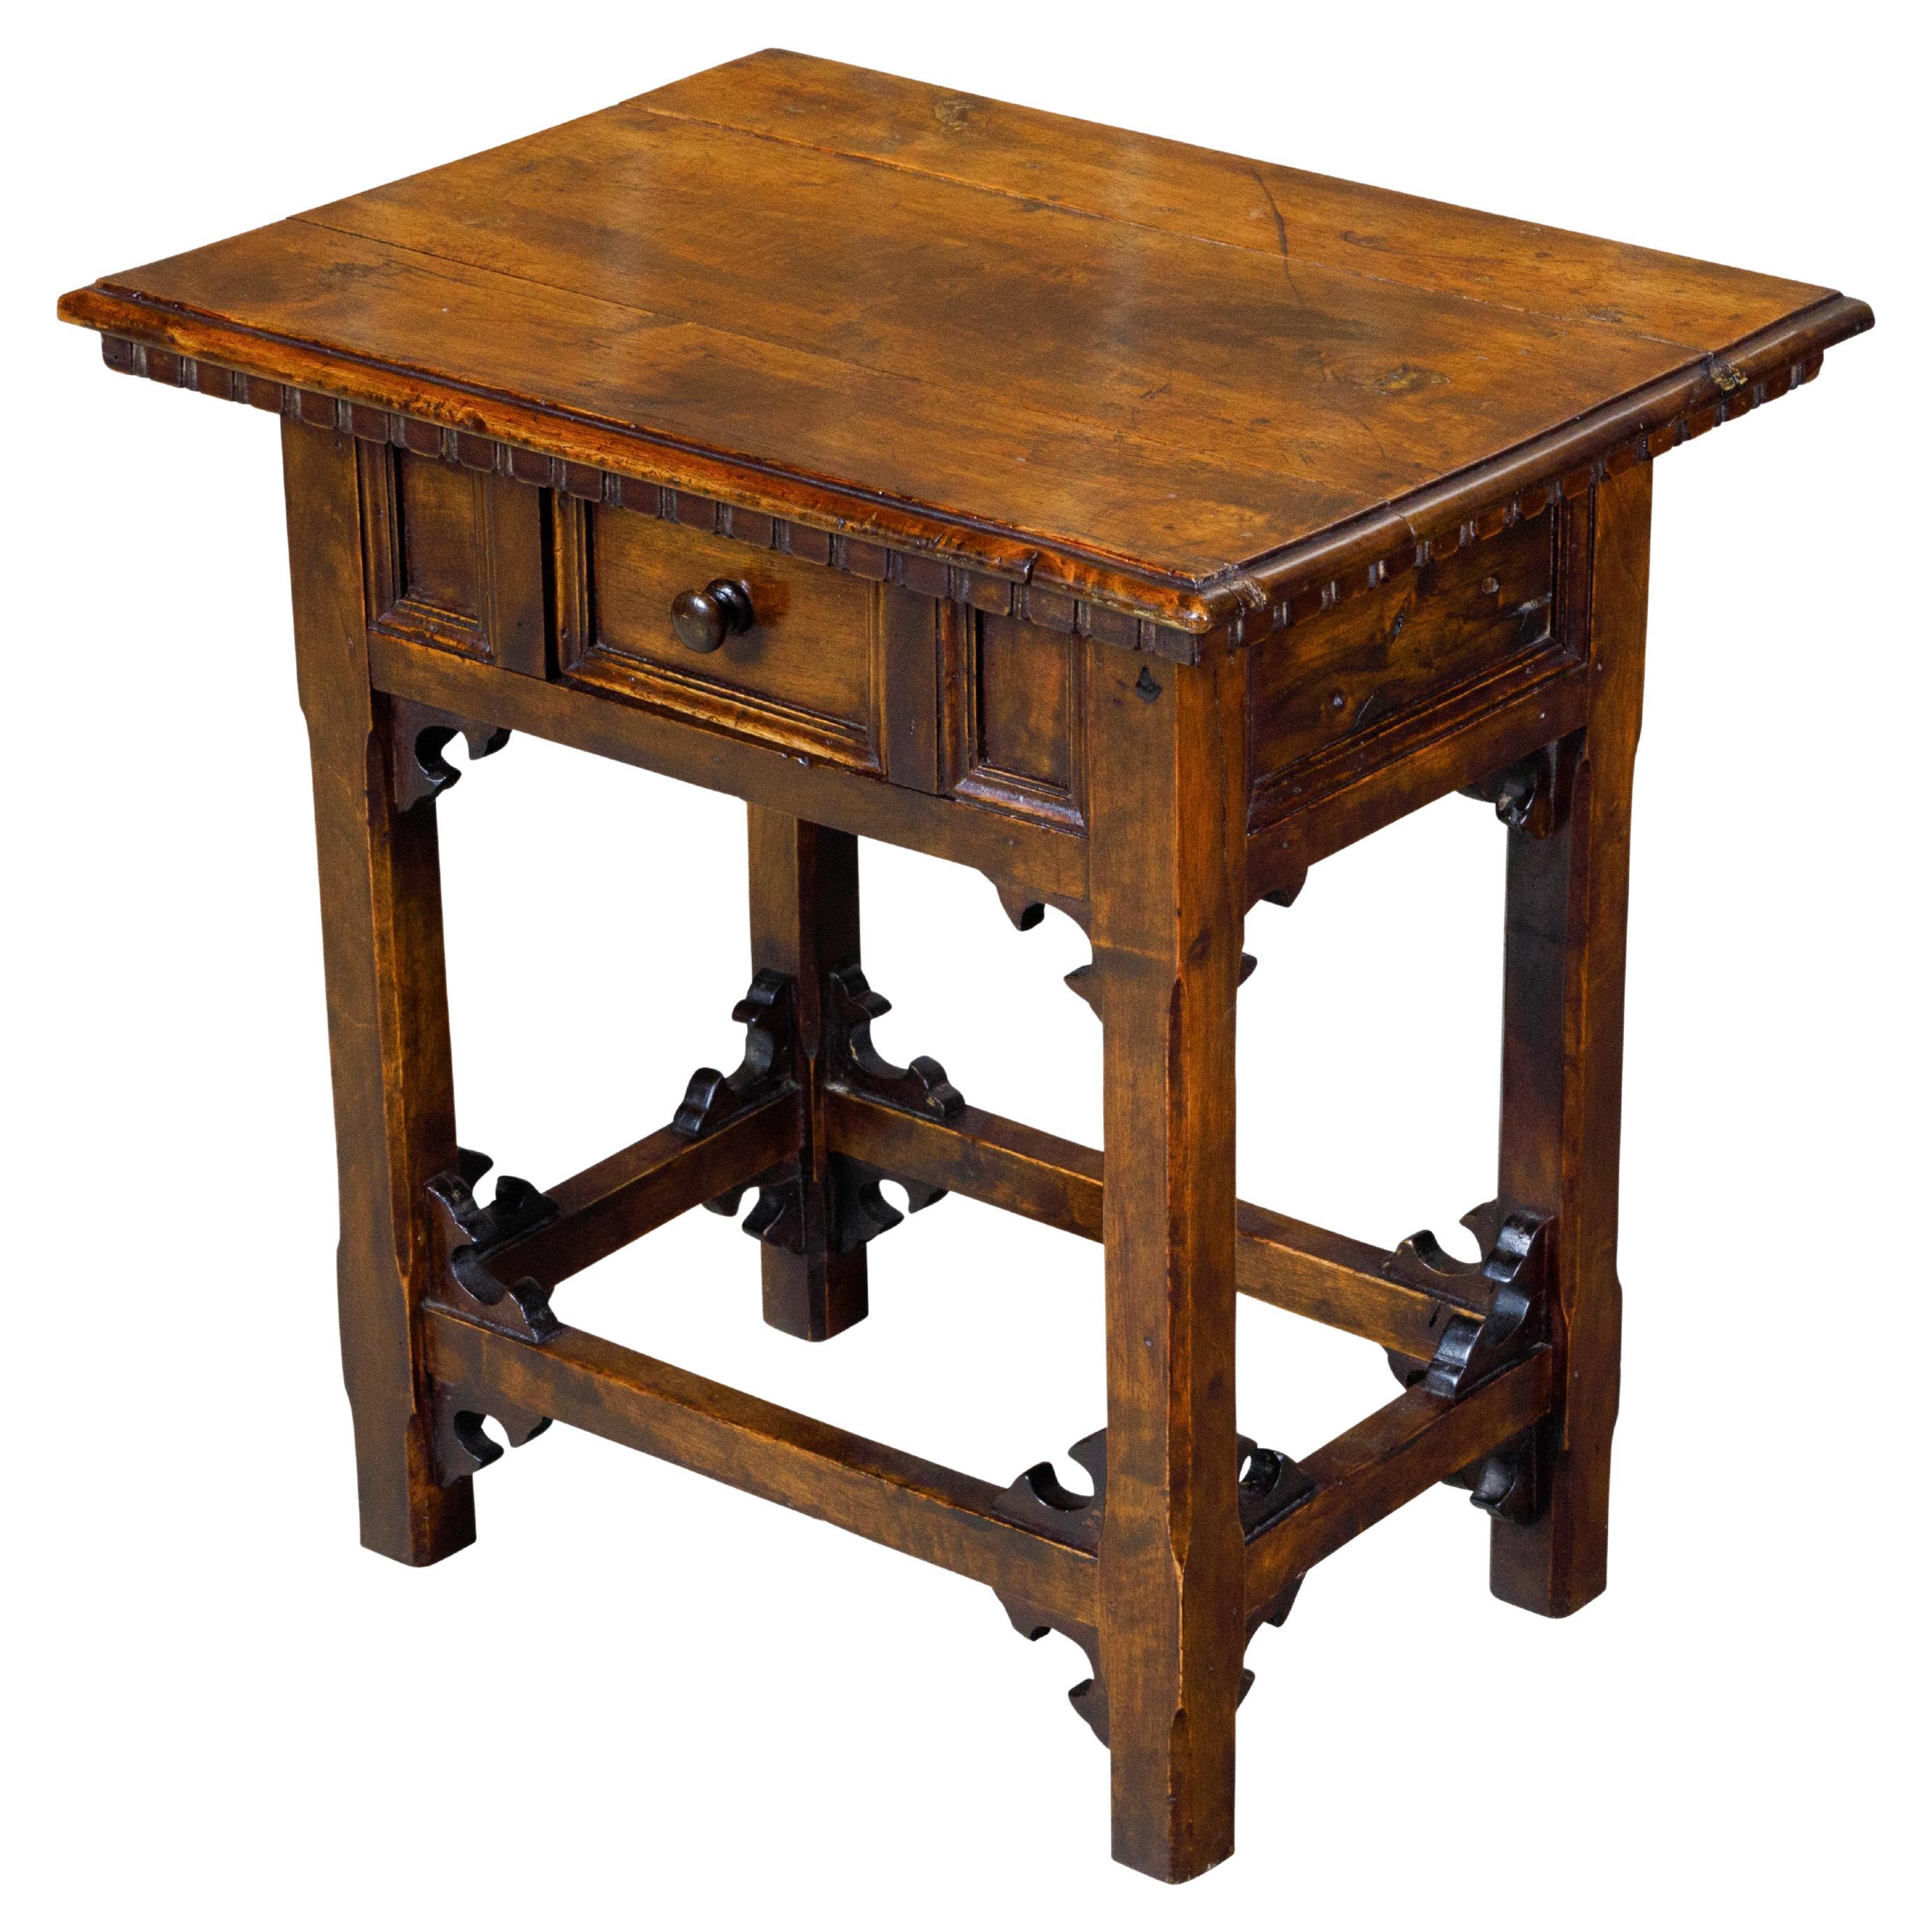 Italian Walnut 19th Century Side Table with Single Drawer and Carved Spandrels